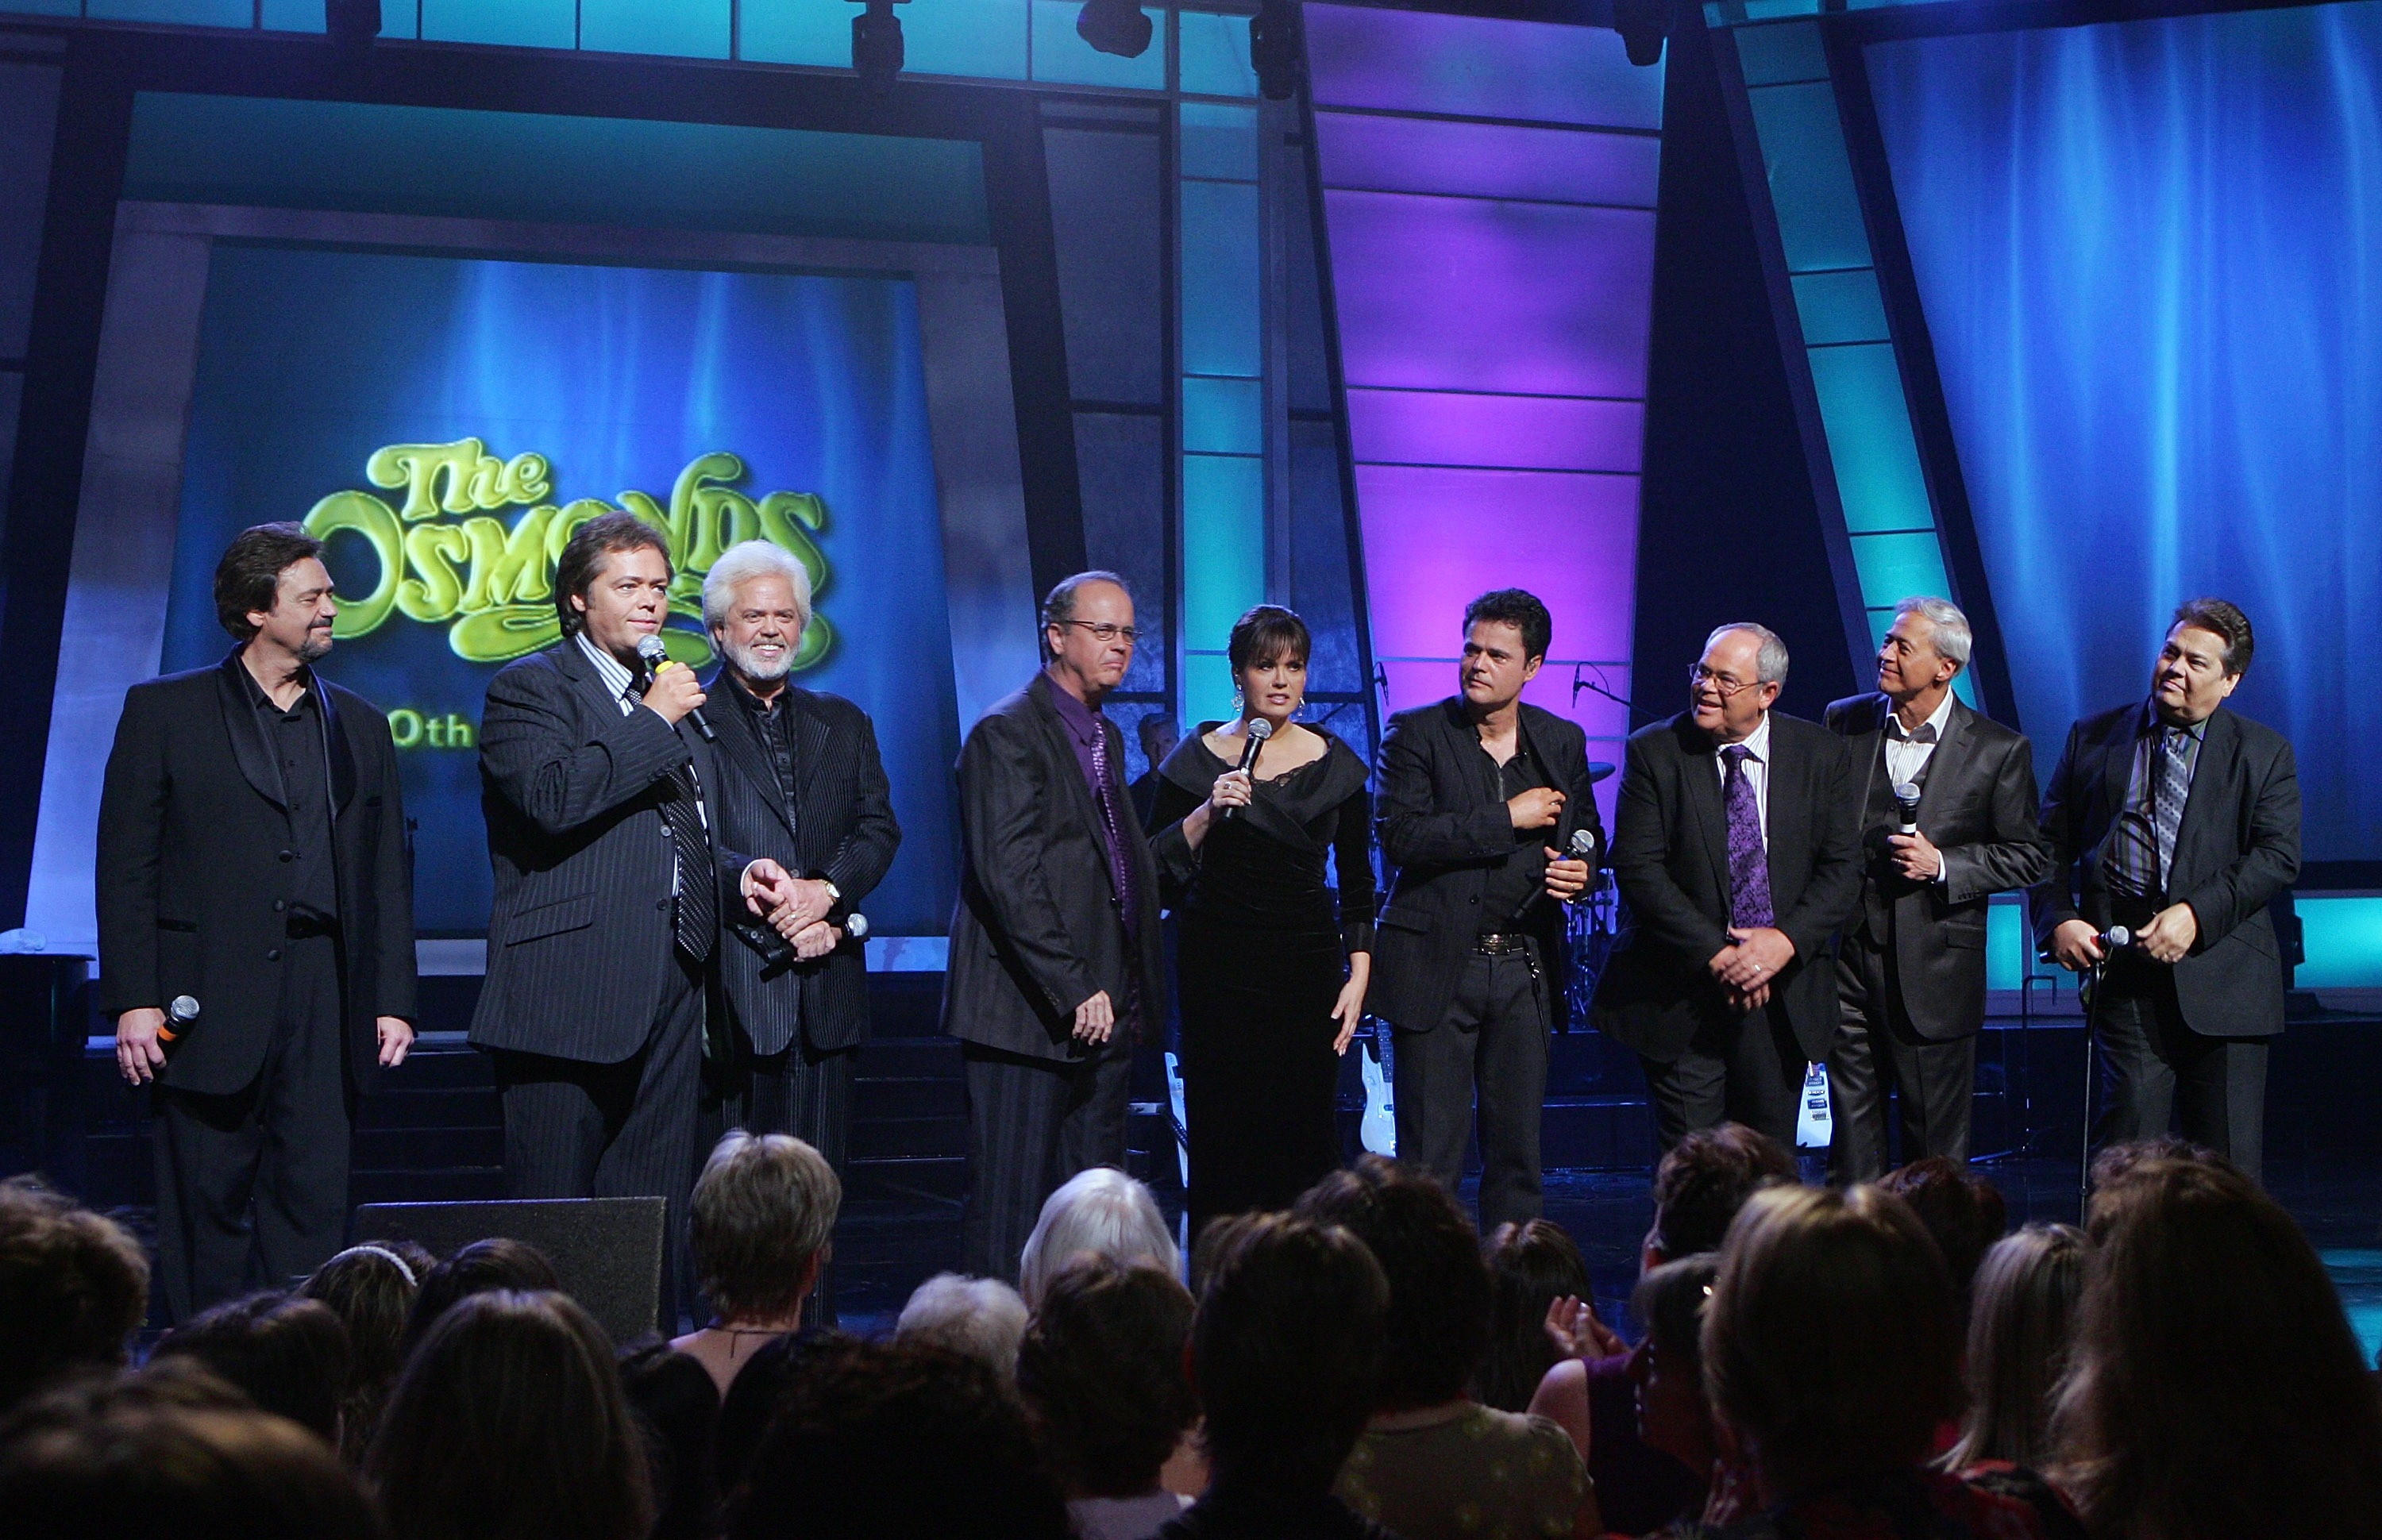 Jay, Jimmy, Merrill, Virl, Marie, Donny, Tom, Wayne, and Alan Osmond, on stage at the Orleans Hotel & Casino in Las Vegas, Nevada, on August 14, 2007. | Source: Getty Images